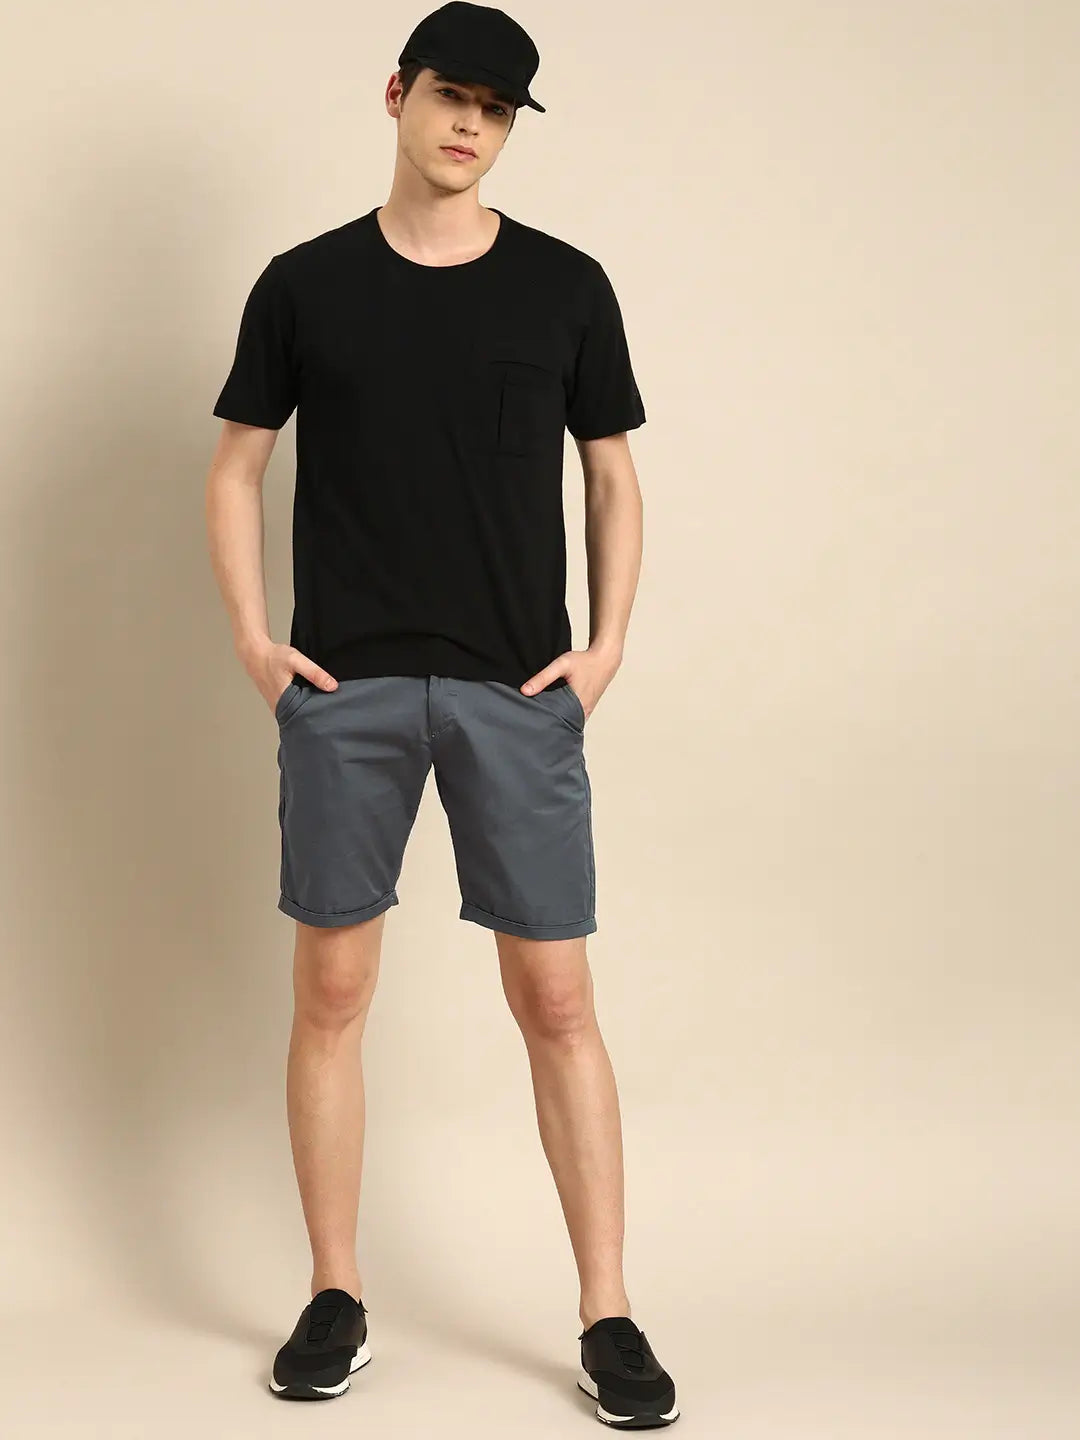 Men Charcoal Gray Solid Slim Fit Chino Shorts - Front View - AceCart